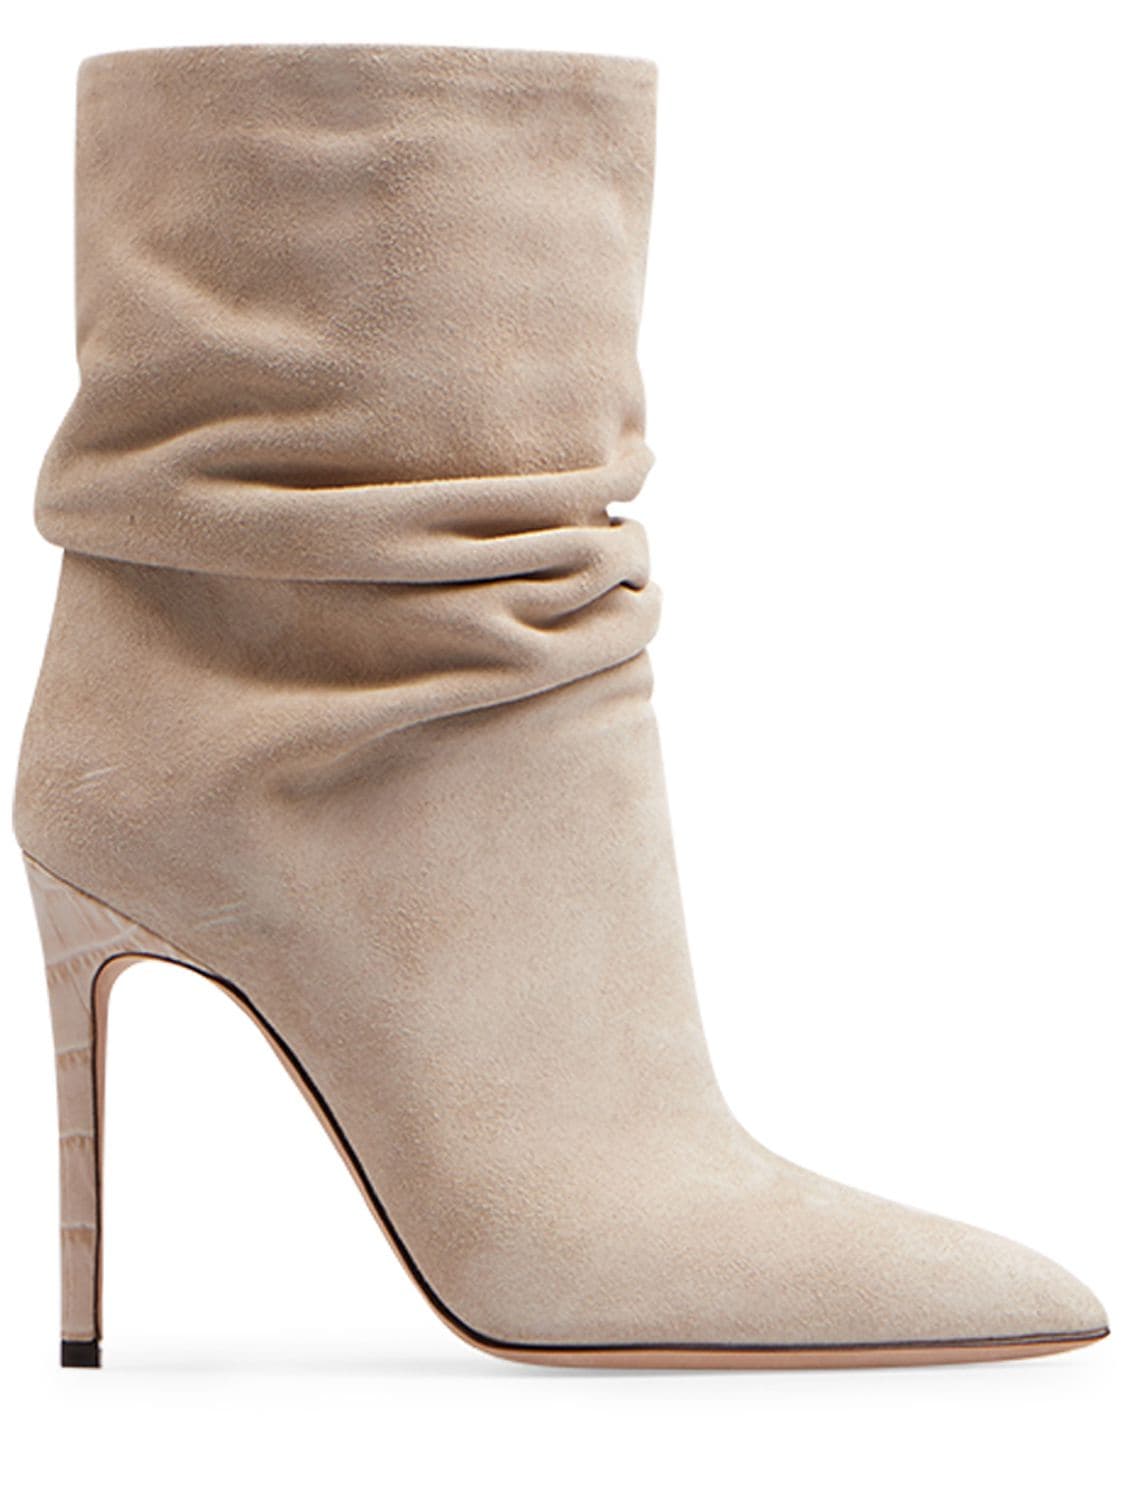 Paris Texas 105mm Slouchy Suede Ankle Boots In Cream